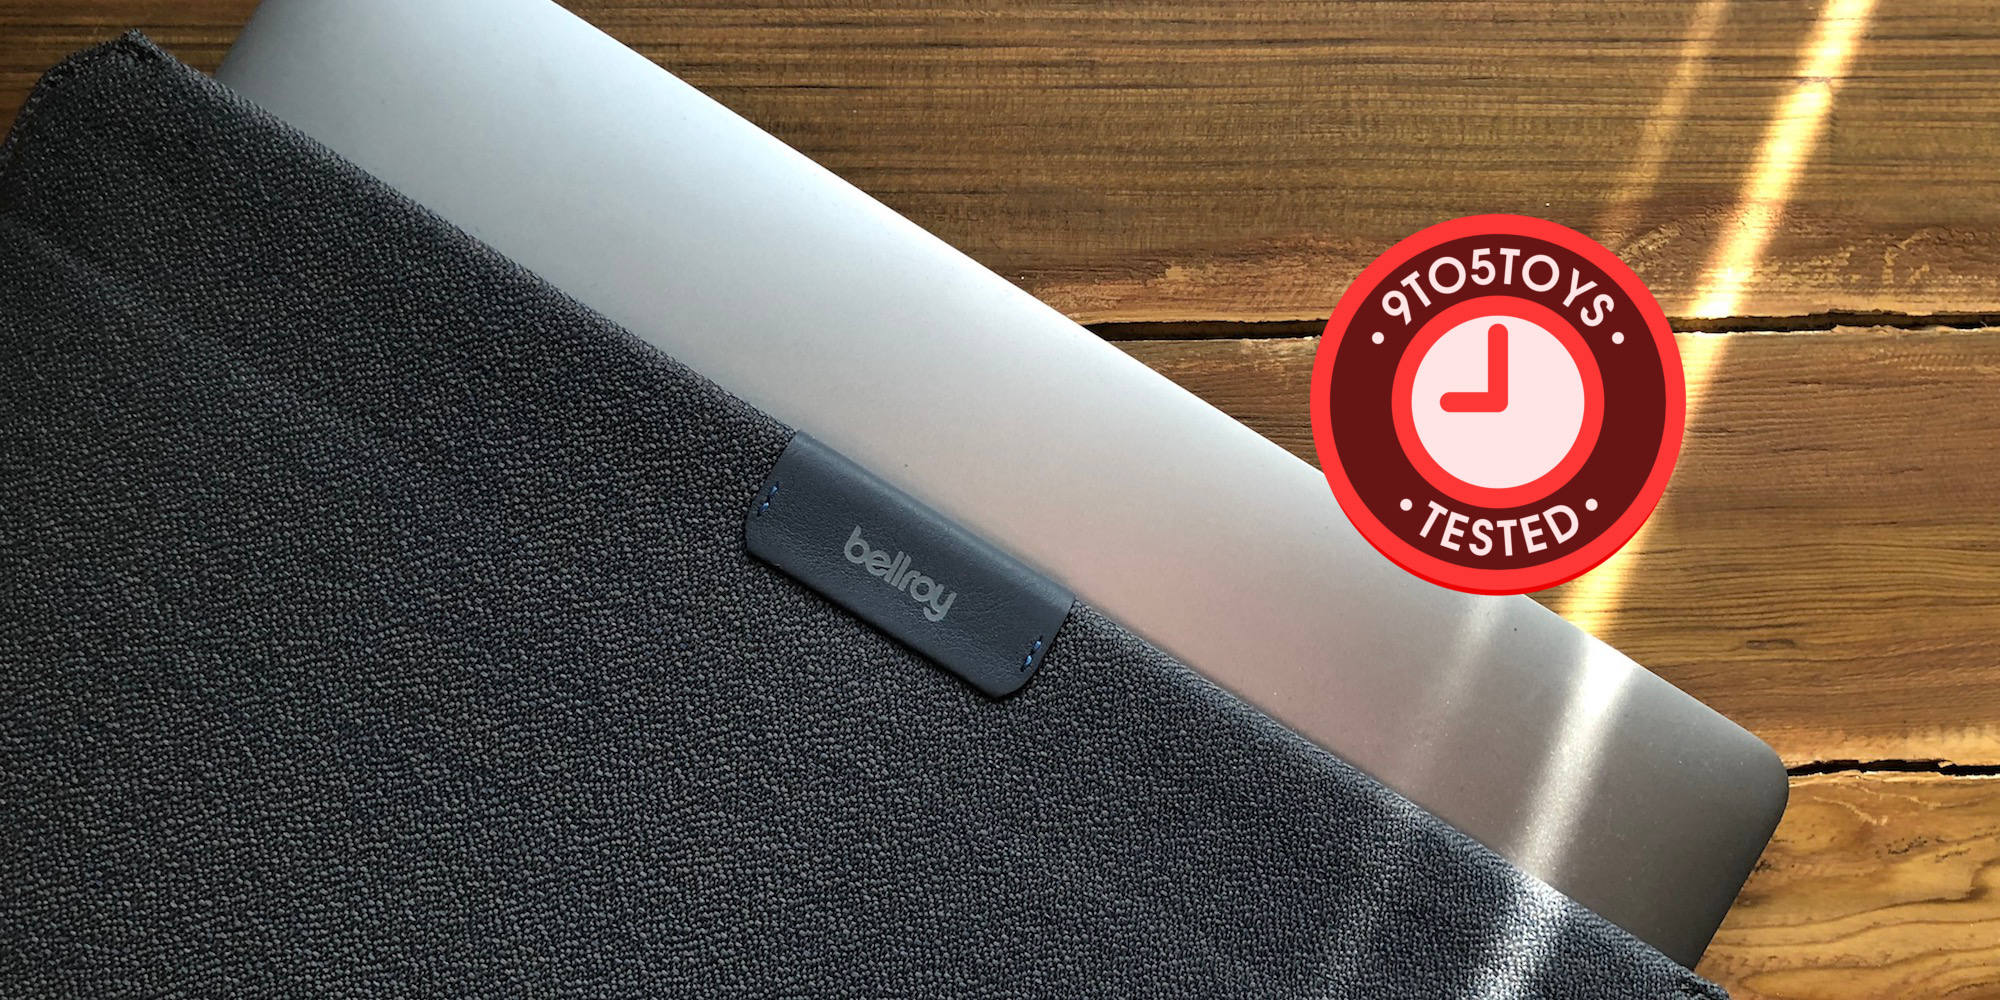 Review: Bellroy's new magnetic antimicrobial MacBook sleeve - 9to5Toys